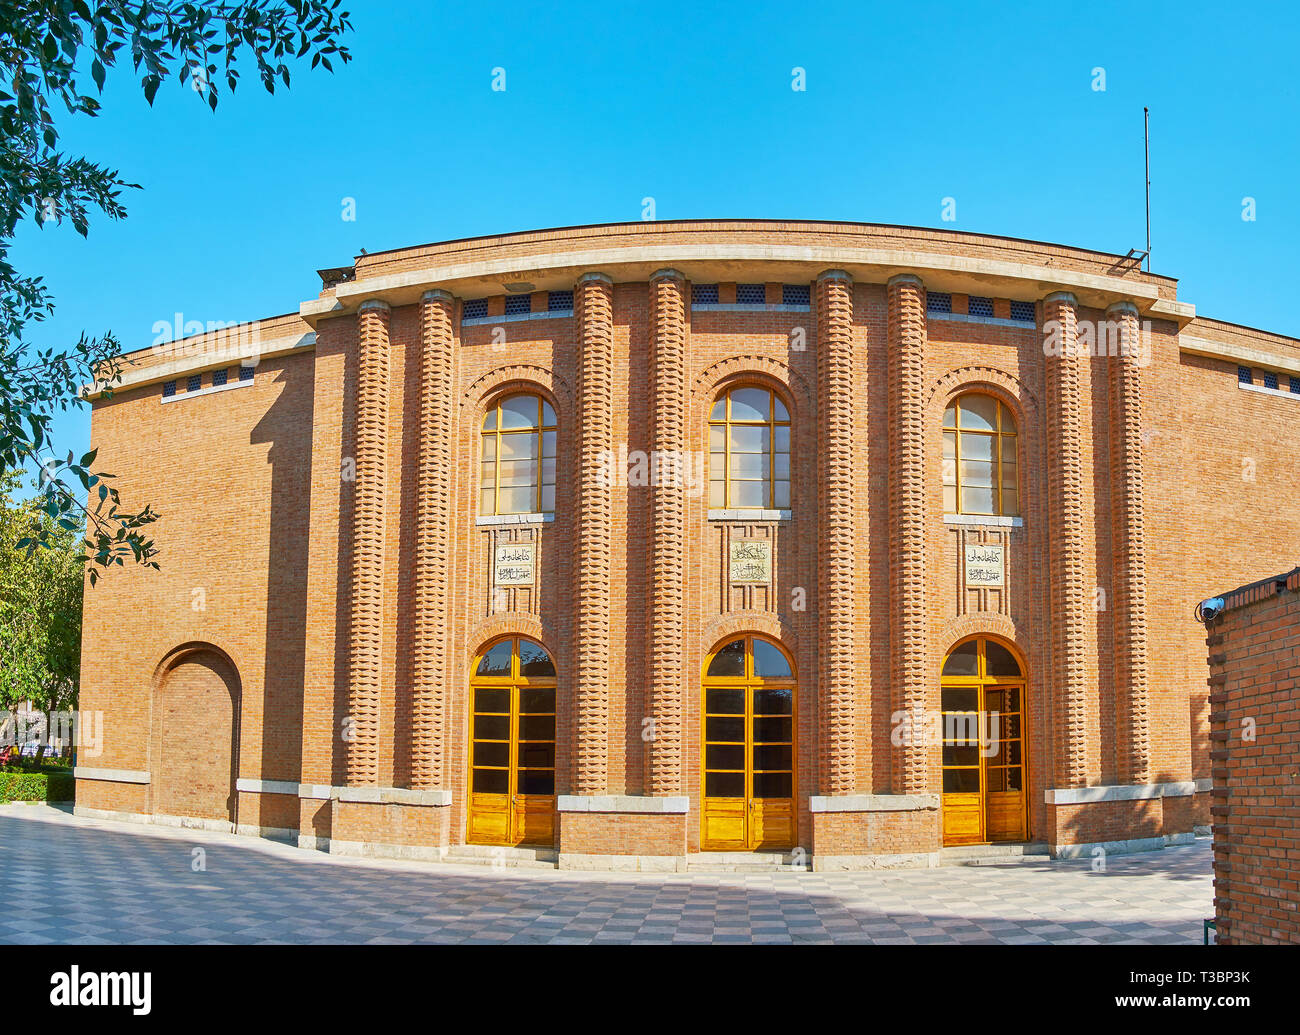 TEHRAN, IRAN - OCTOBER 25, 2017: The brick building of the Museum of Ancient Iran - the part of National Museum of Iran, on October 25 in Tehran Stock Photo